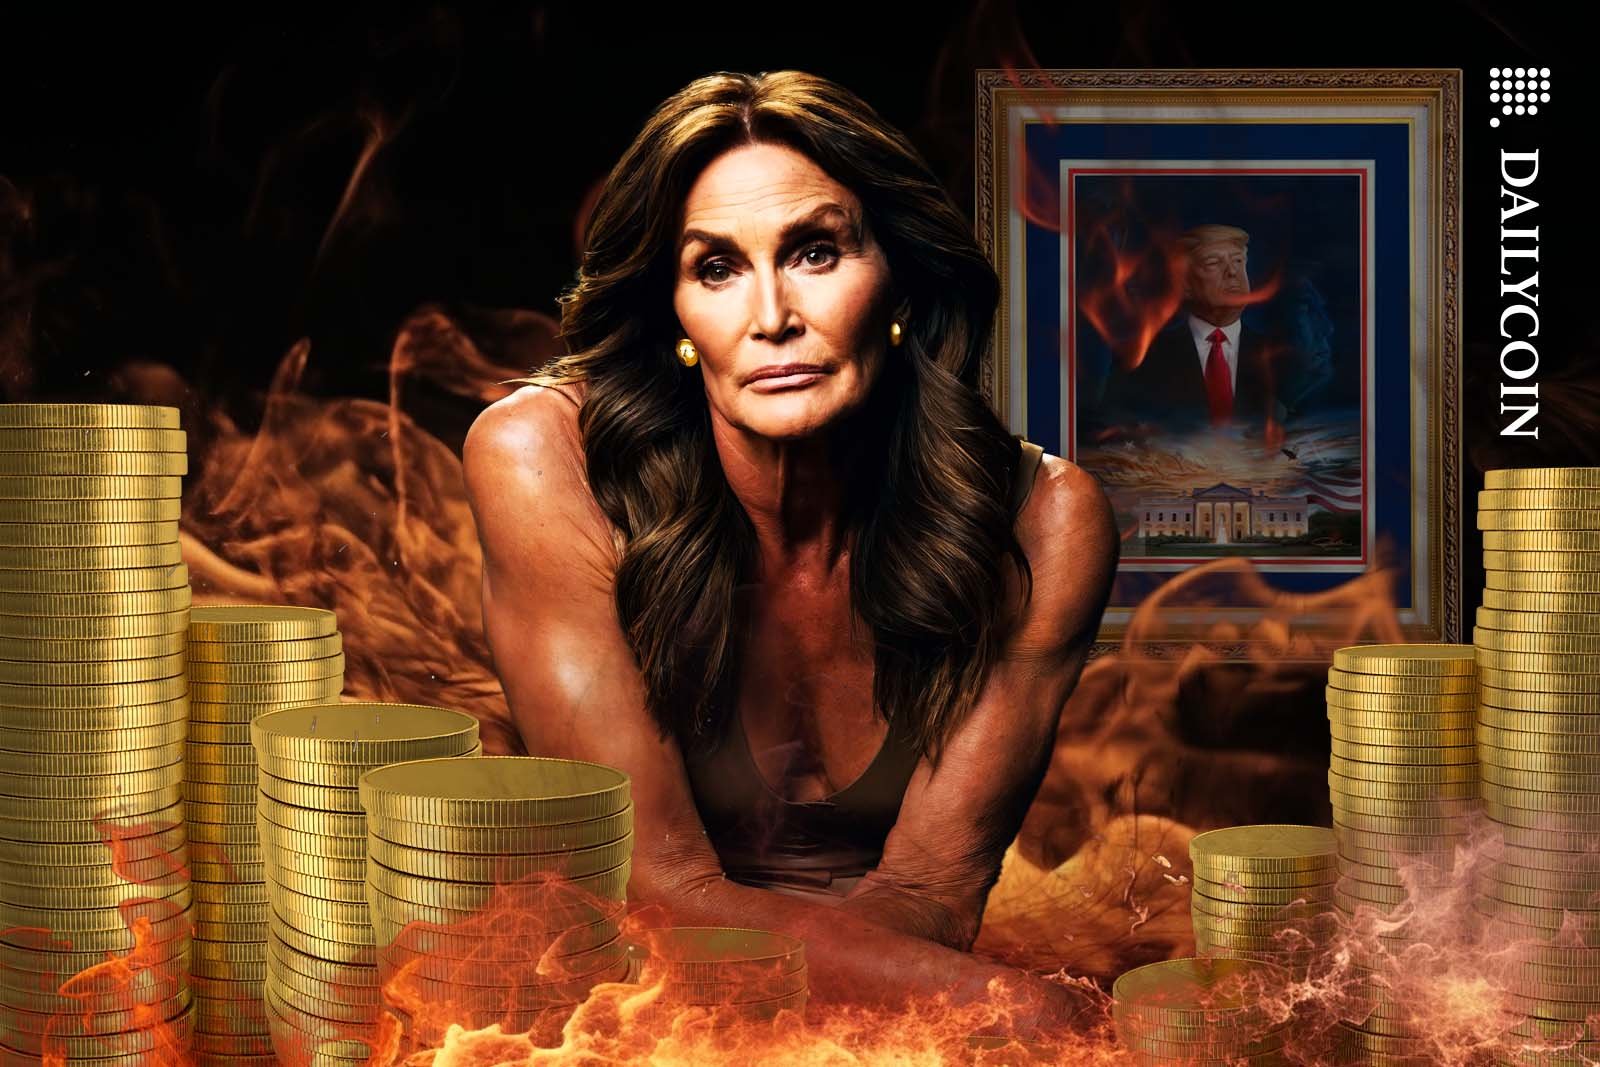 Caitlyn Jenner surrounded by golden coins and fire, with a Trump painting in te background.